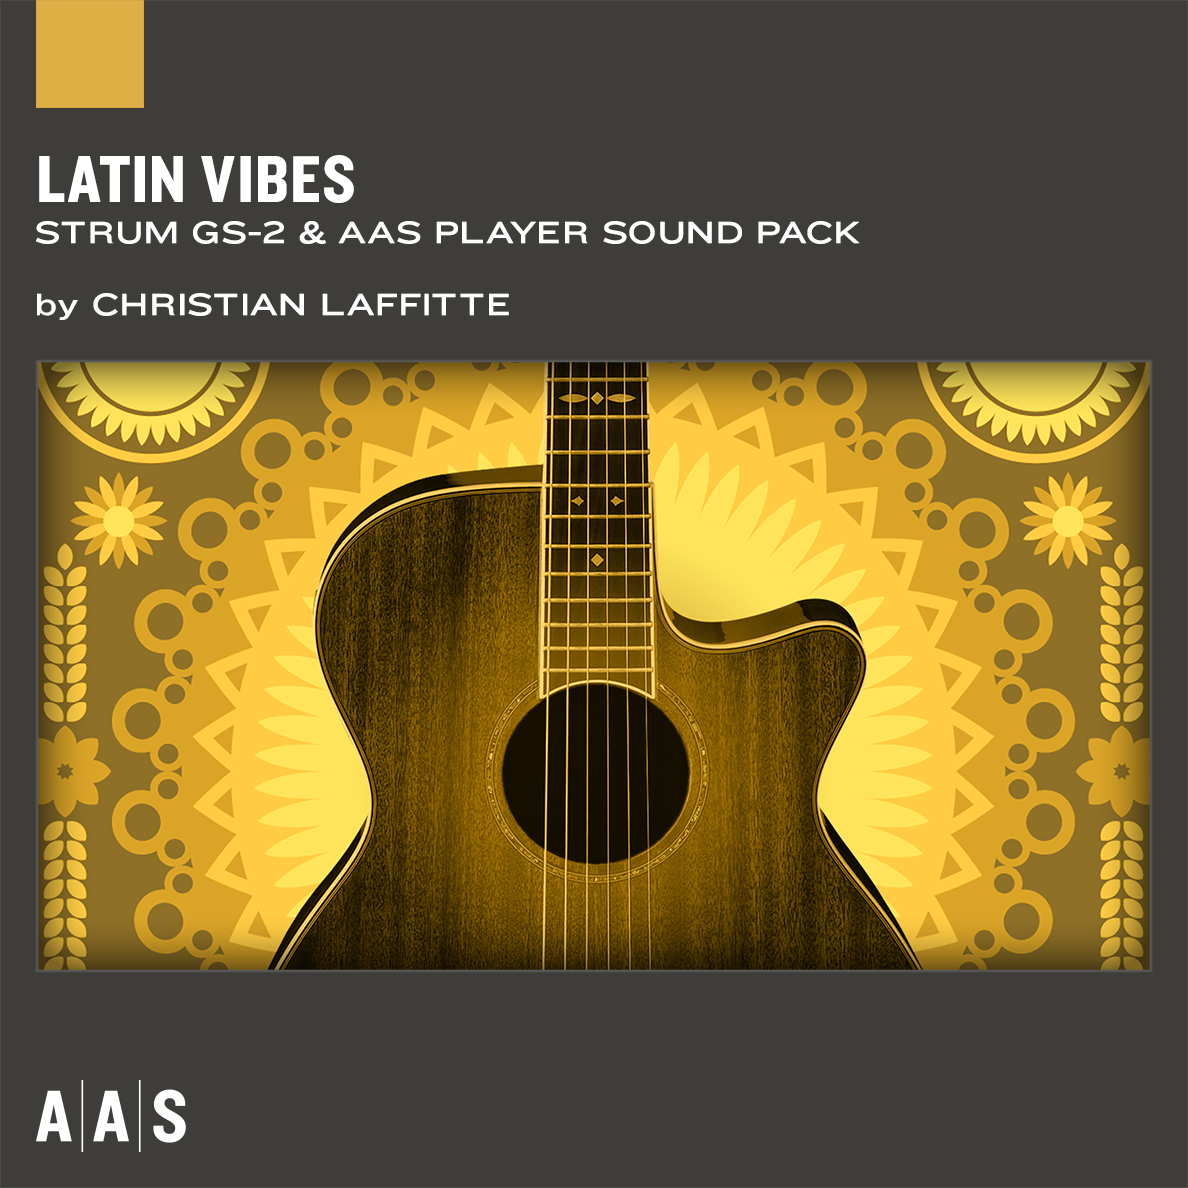 STRUM GS and AAS Player sound pack ： Latin Vibes